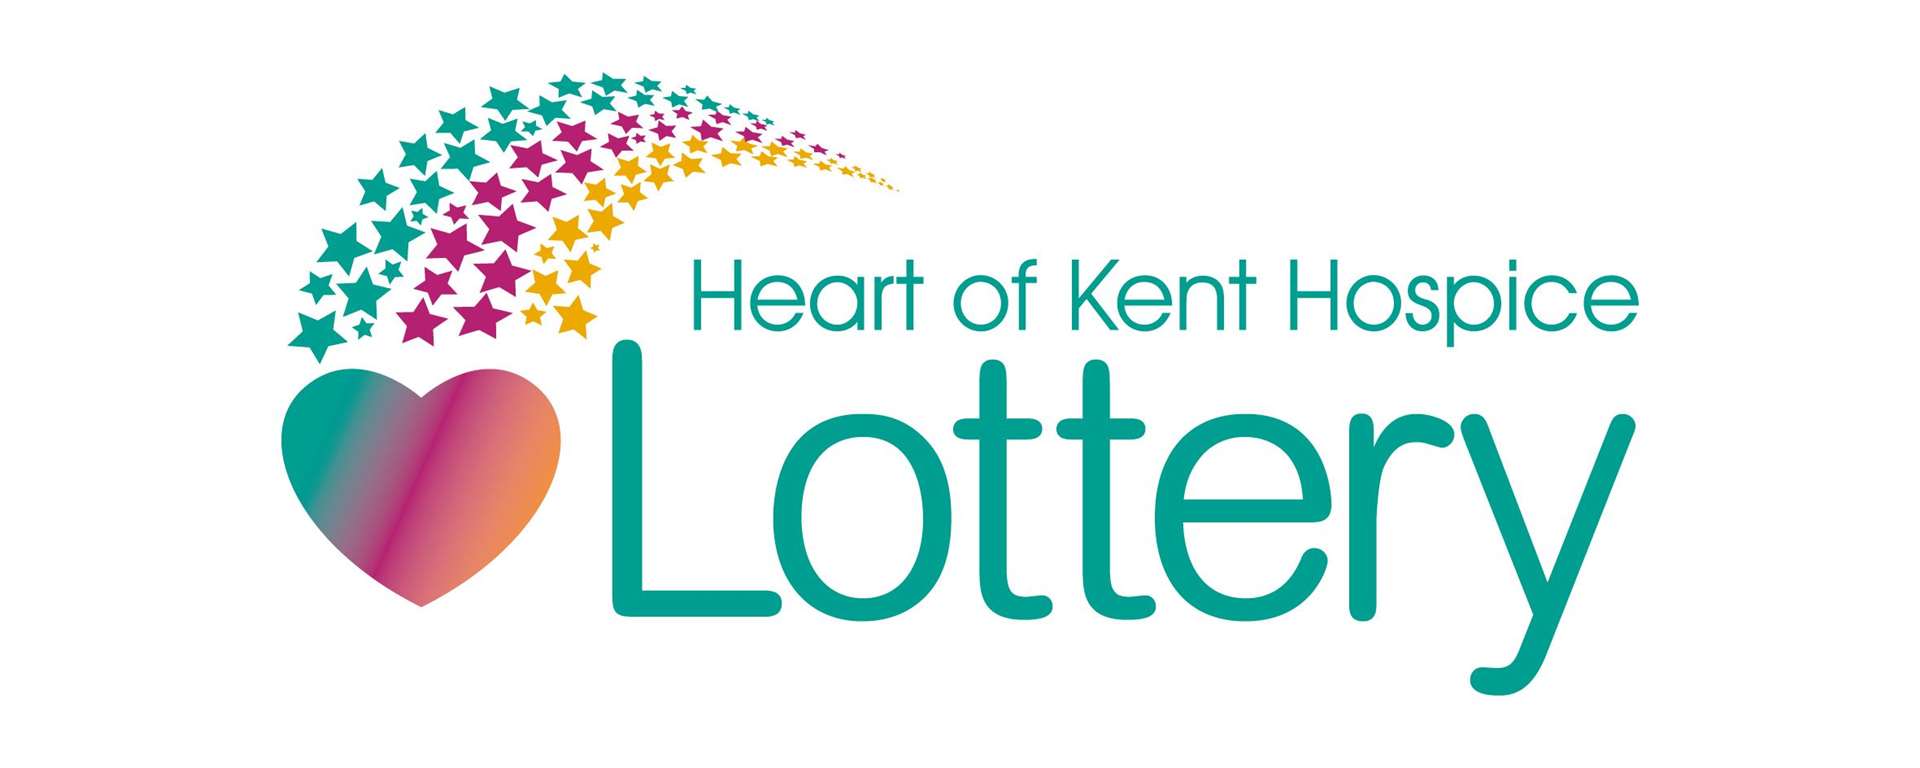 Heart Of Kent Hospice  Hospice weekly lottery